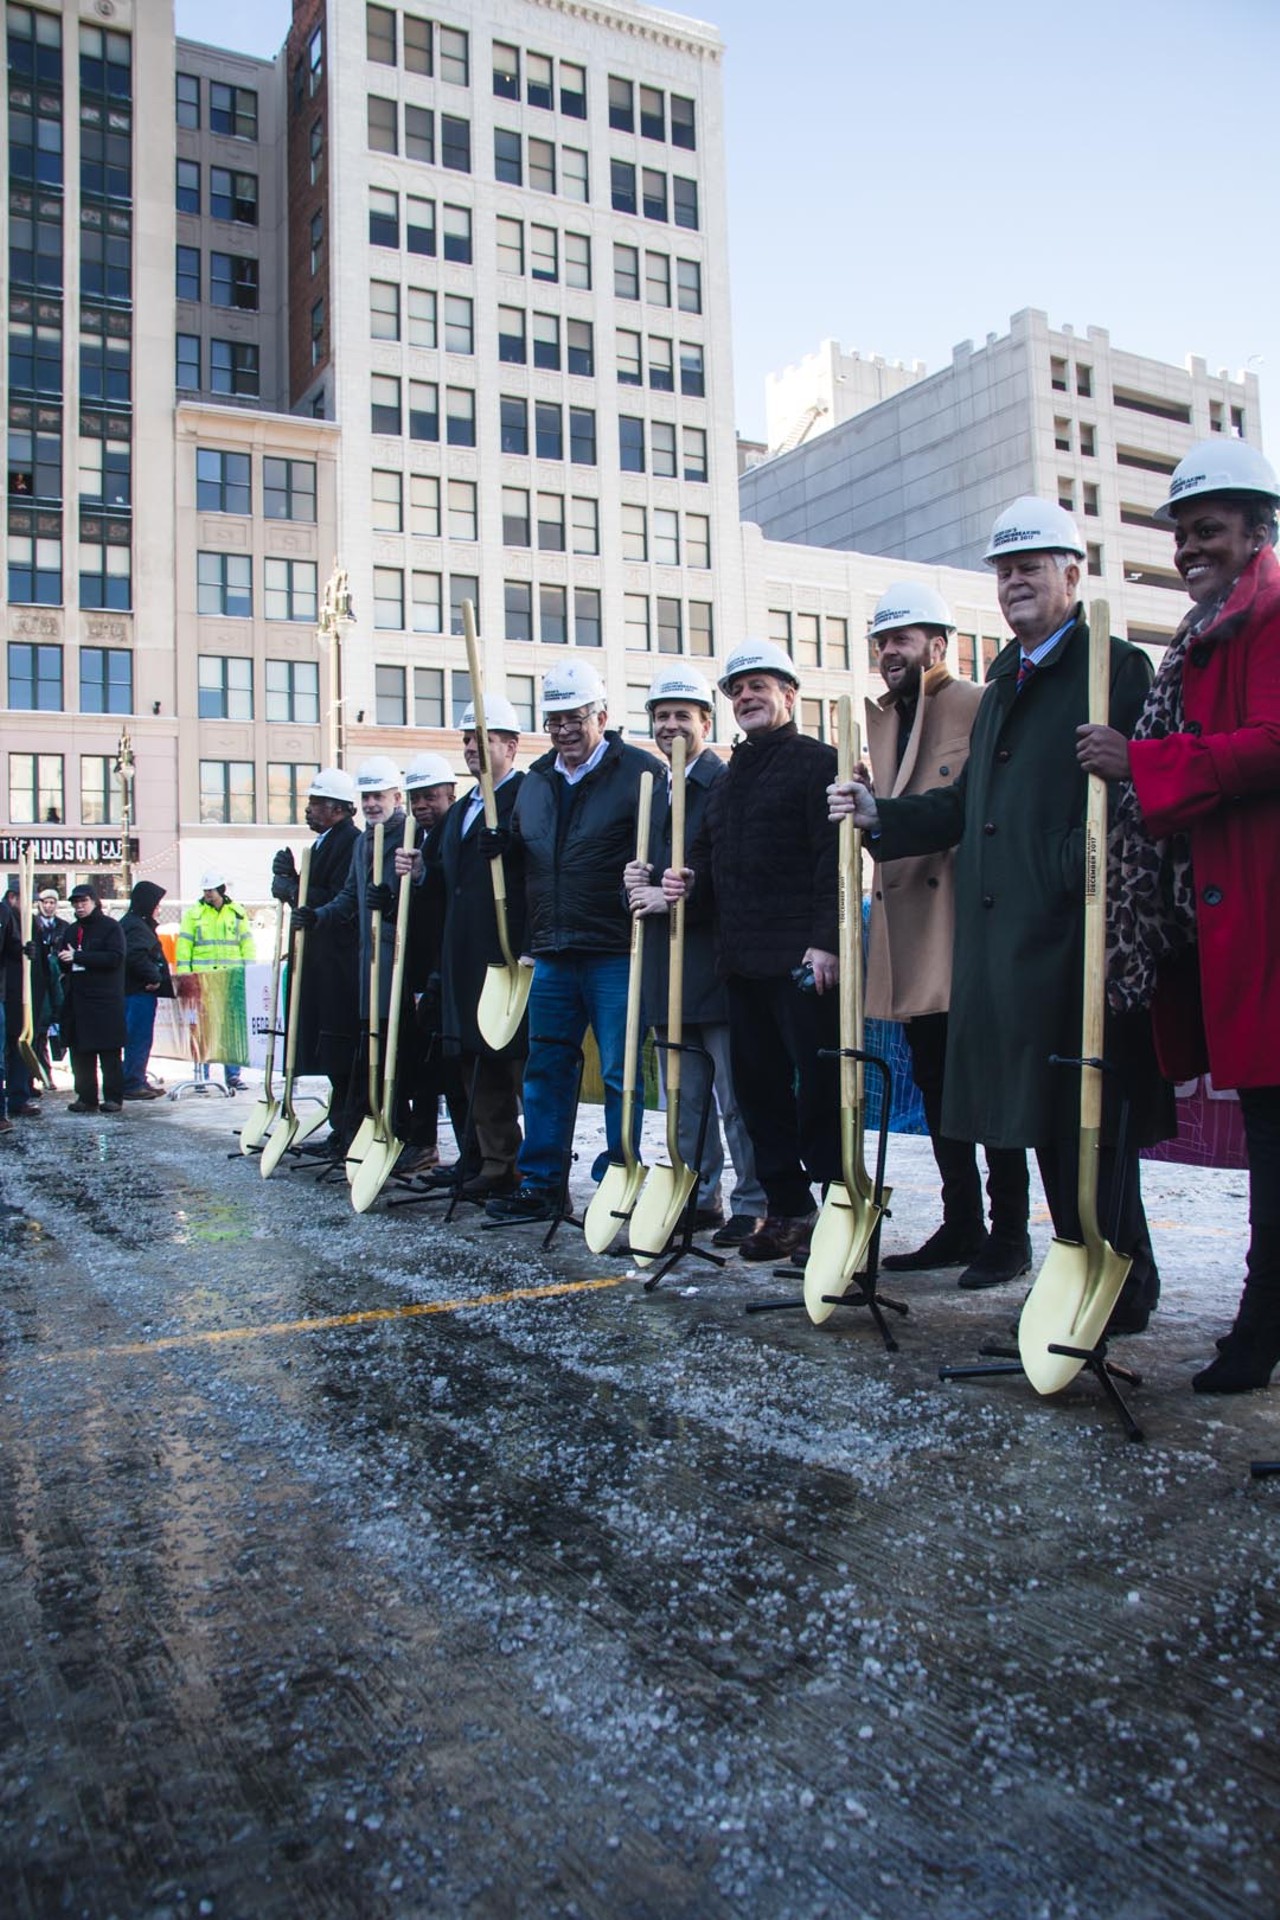 Photos from the Hudson's site skyscraper groundbreaking